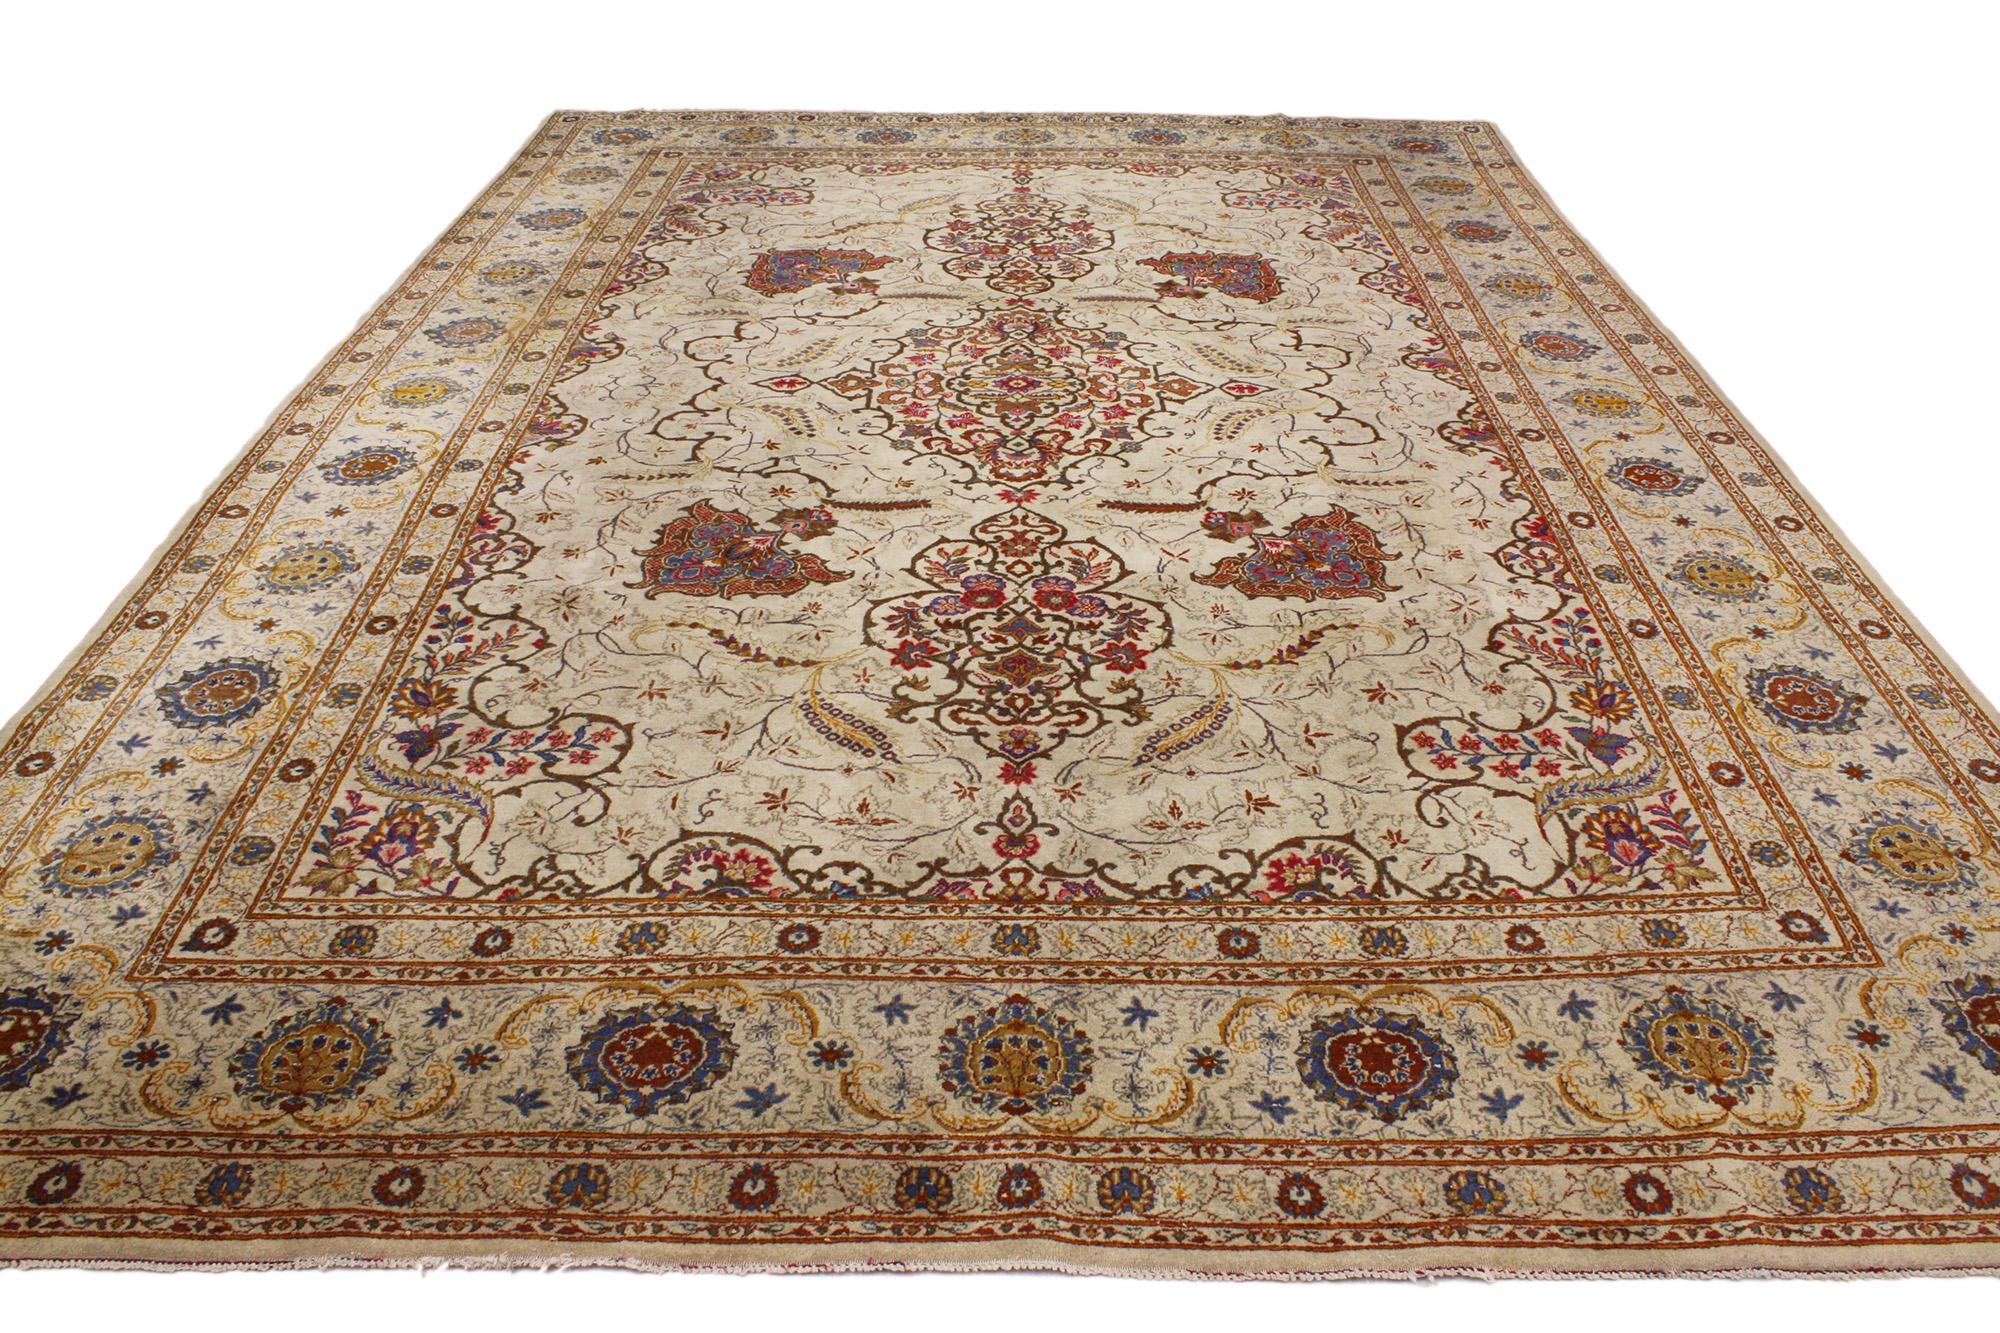 73351 Antique Persian Kashan Rug, 08'09 x 12'06. Persian Kashan rugs are meticulously crafted hand-knotted rugs originating from Kashan, Iran, celebrated for their intricate designs, superior craftsmanship, and storied heritage. Typically featuring